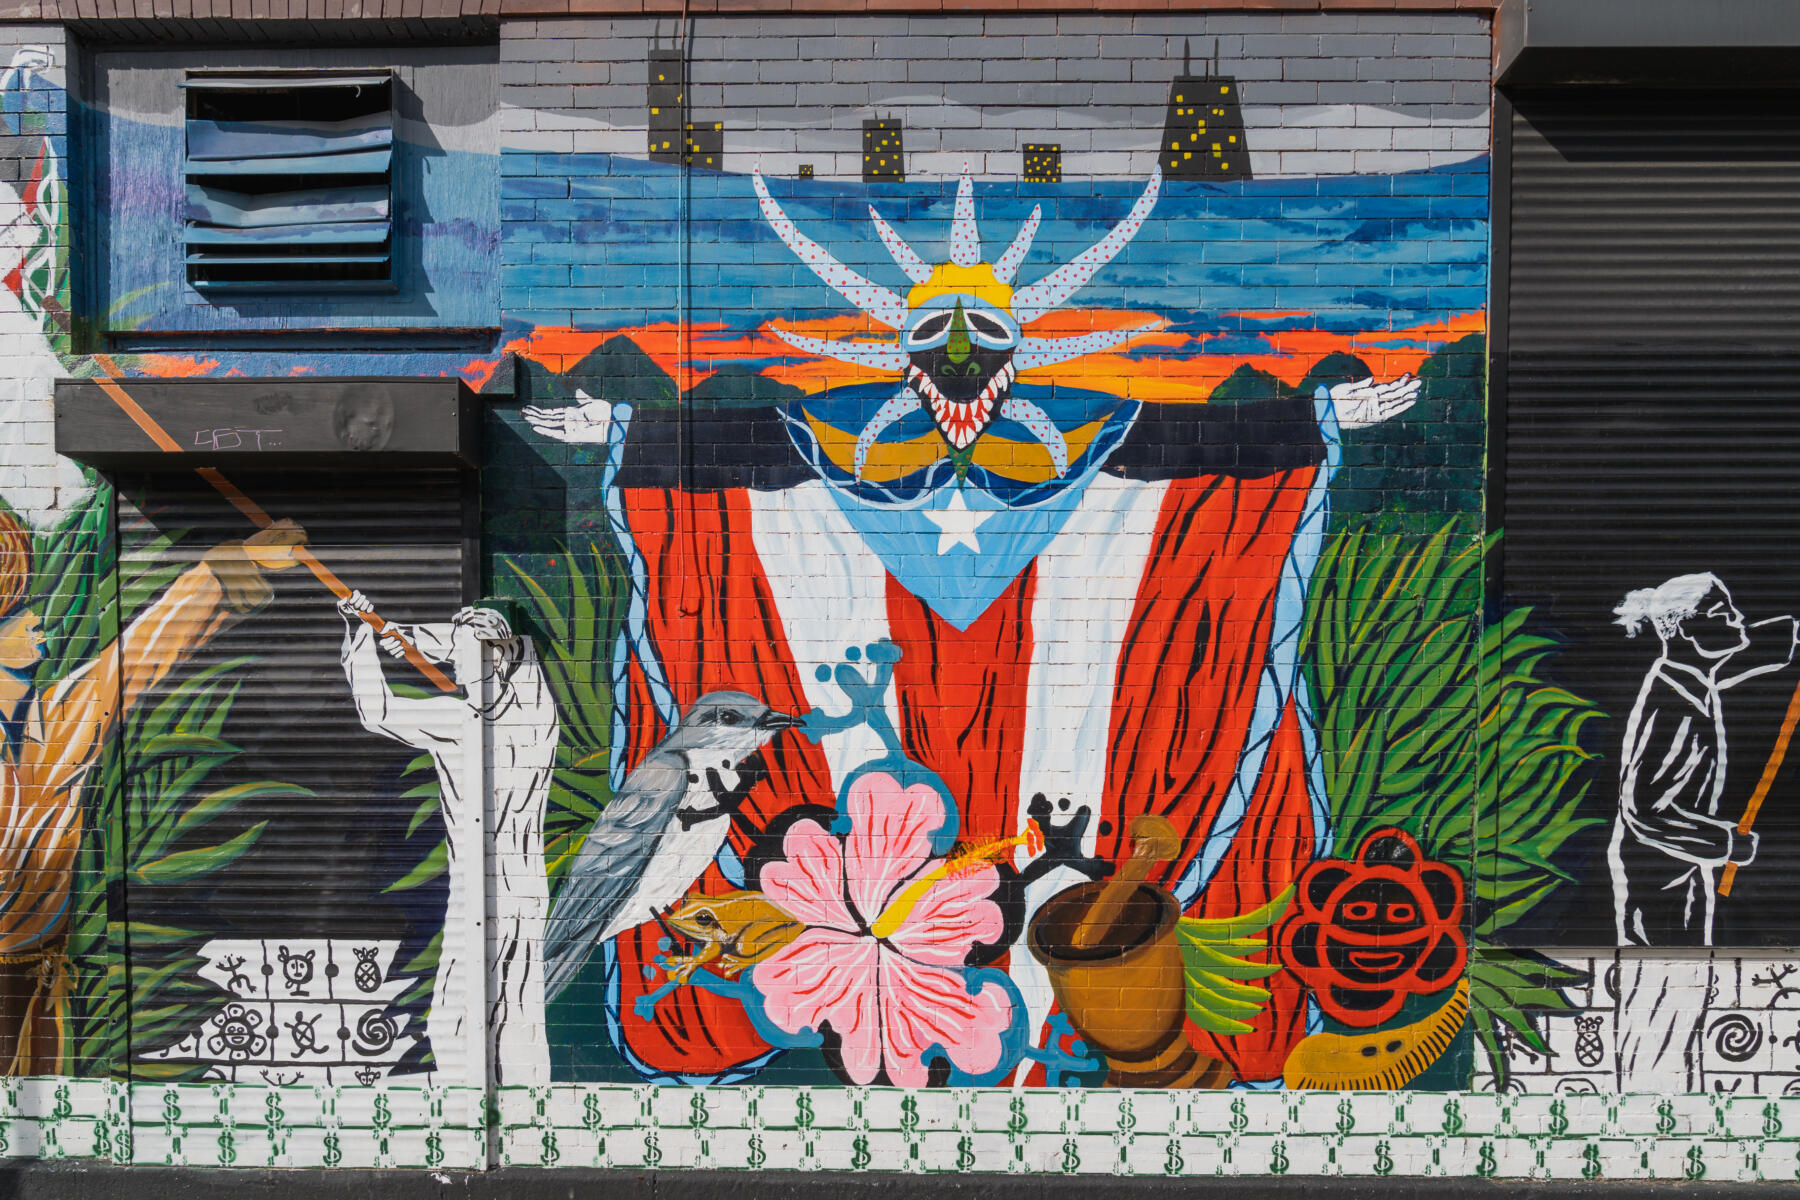 A mural in Humboldt Park